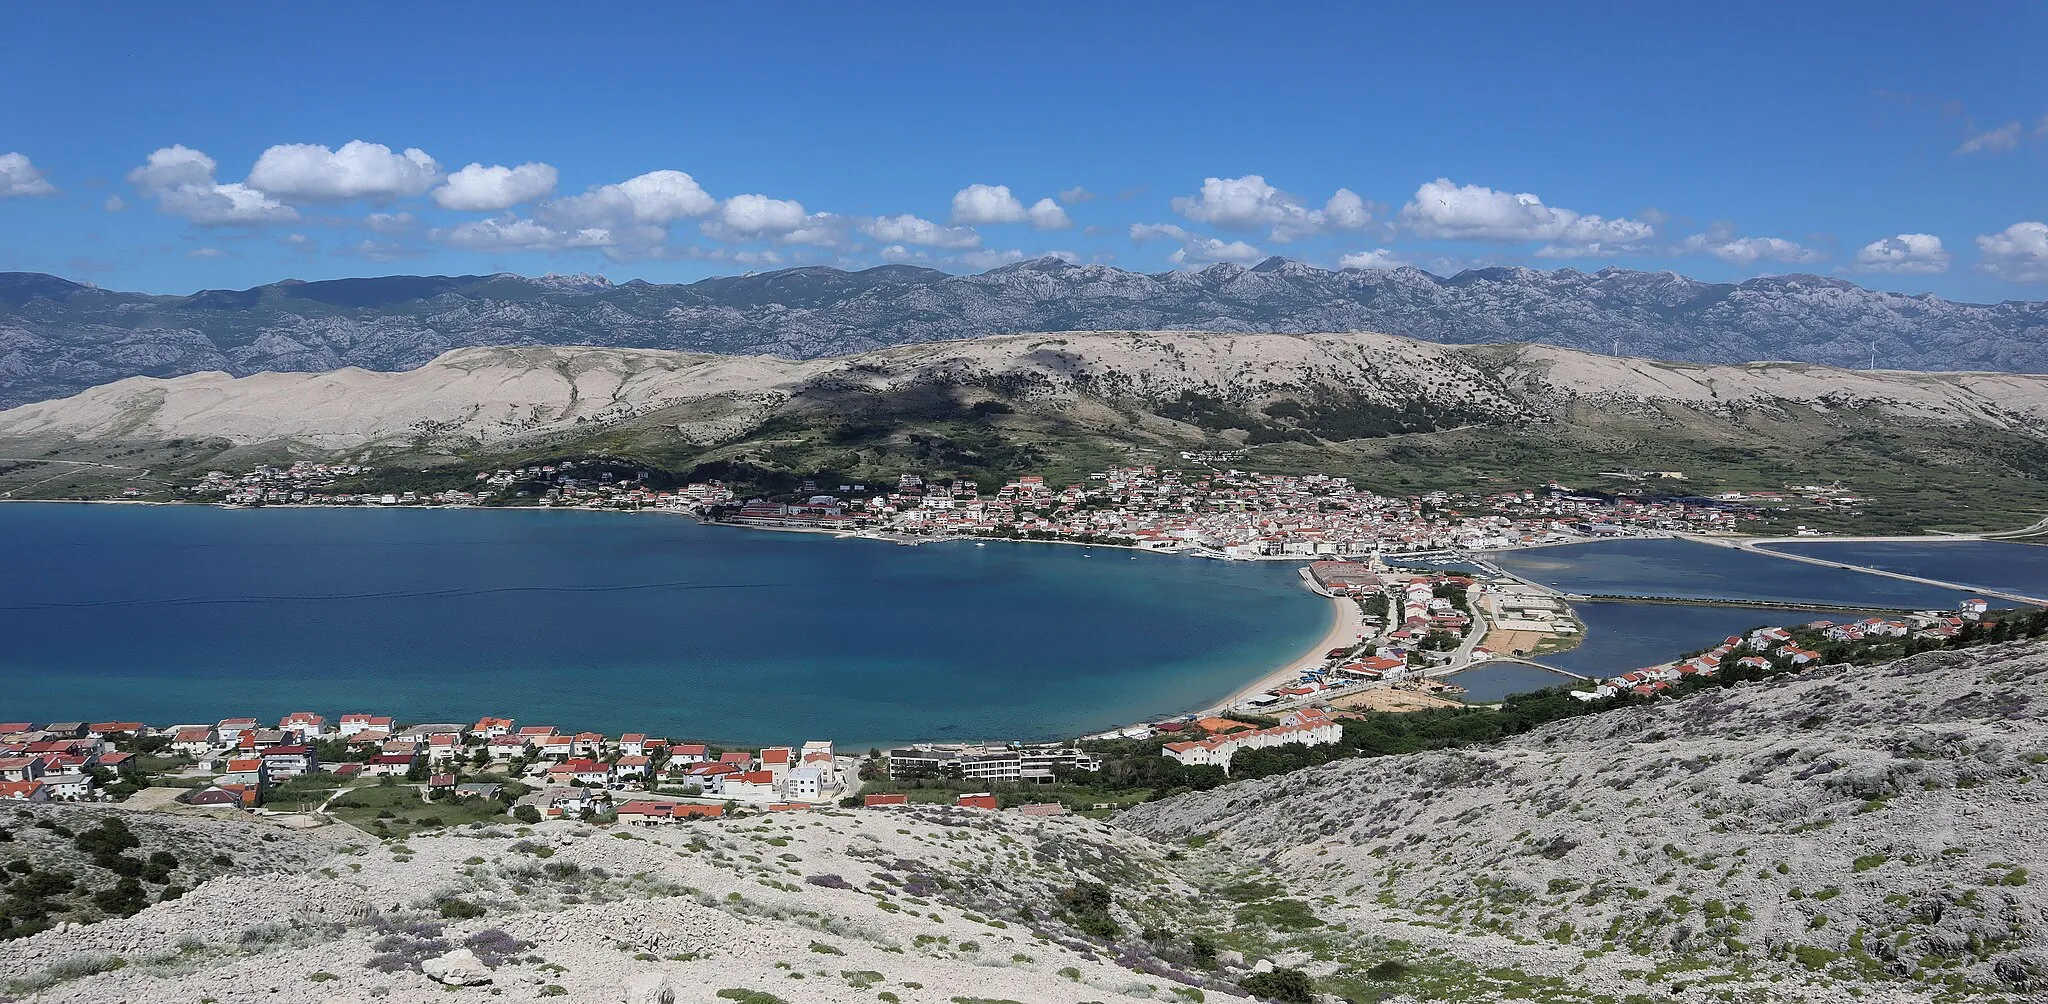 Image of Pag